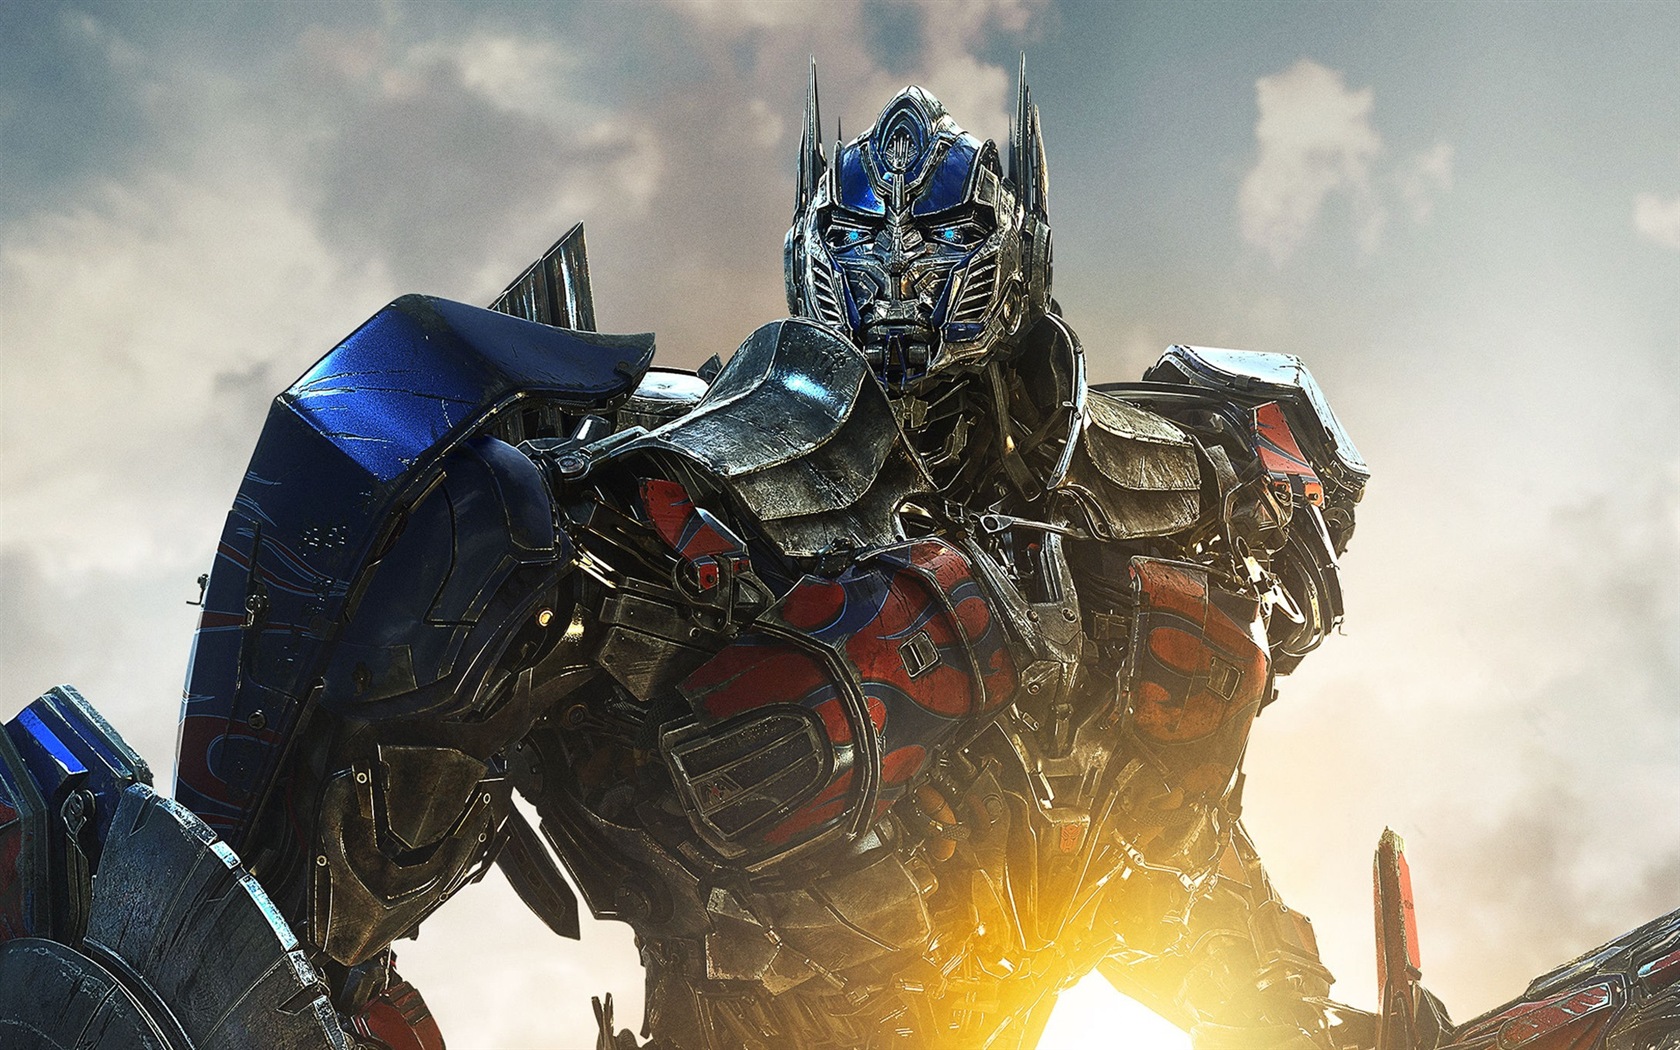 2014 Transformers: Age of Extinction HD wallpapers #2 - 1680x1050